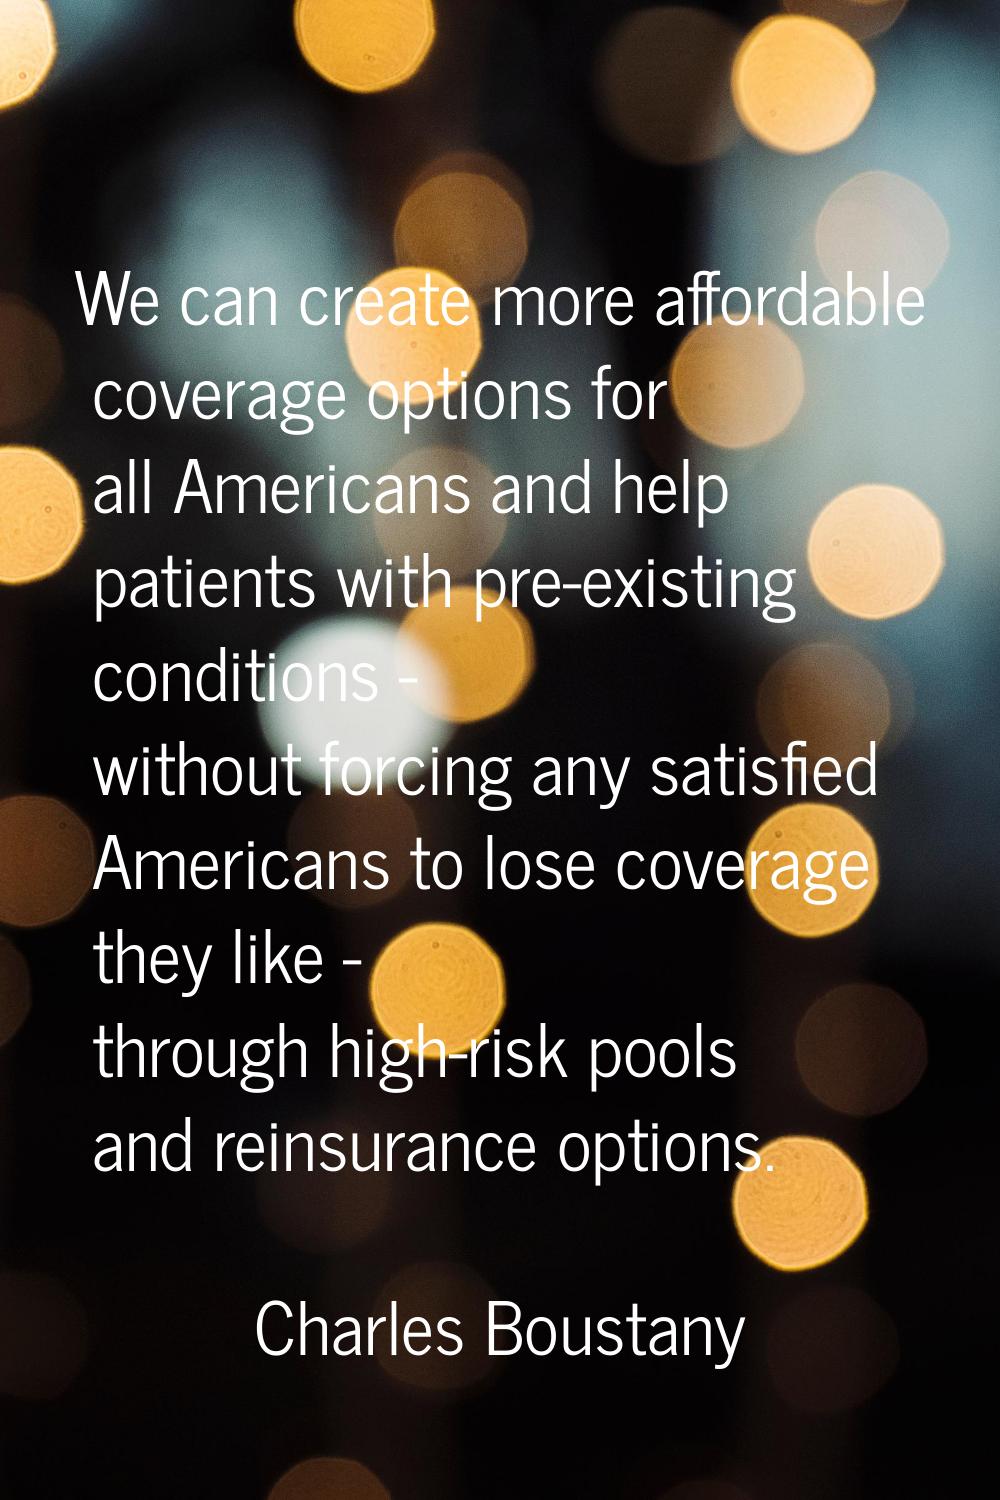 We can create more affordable coverage options for all Americans and help patients with pre-existin